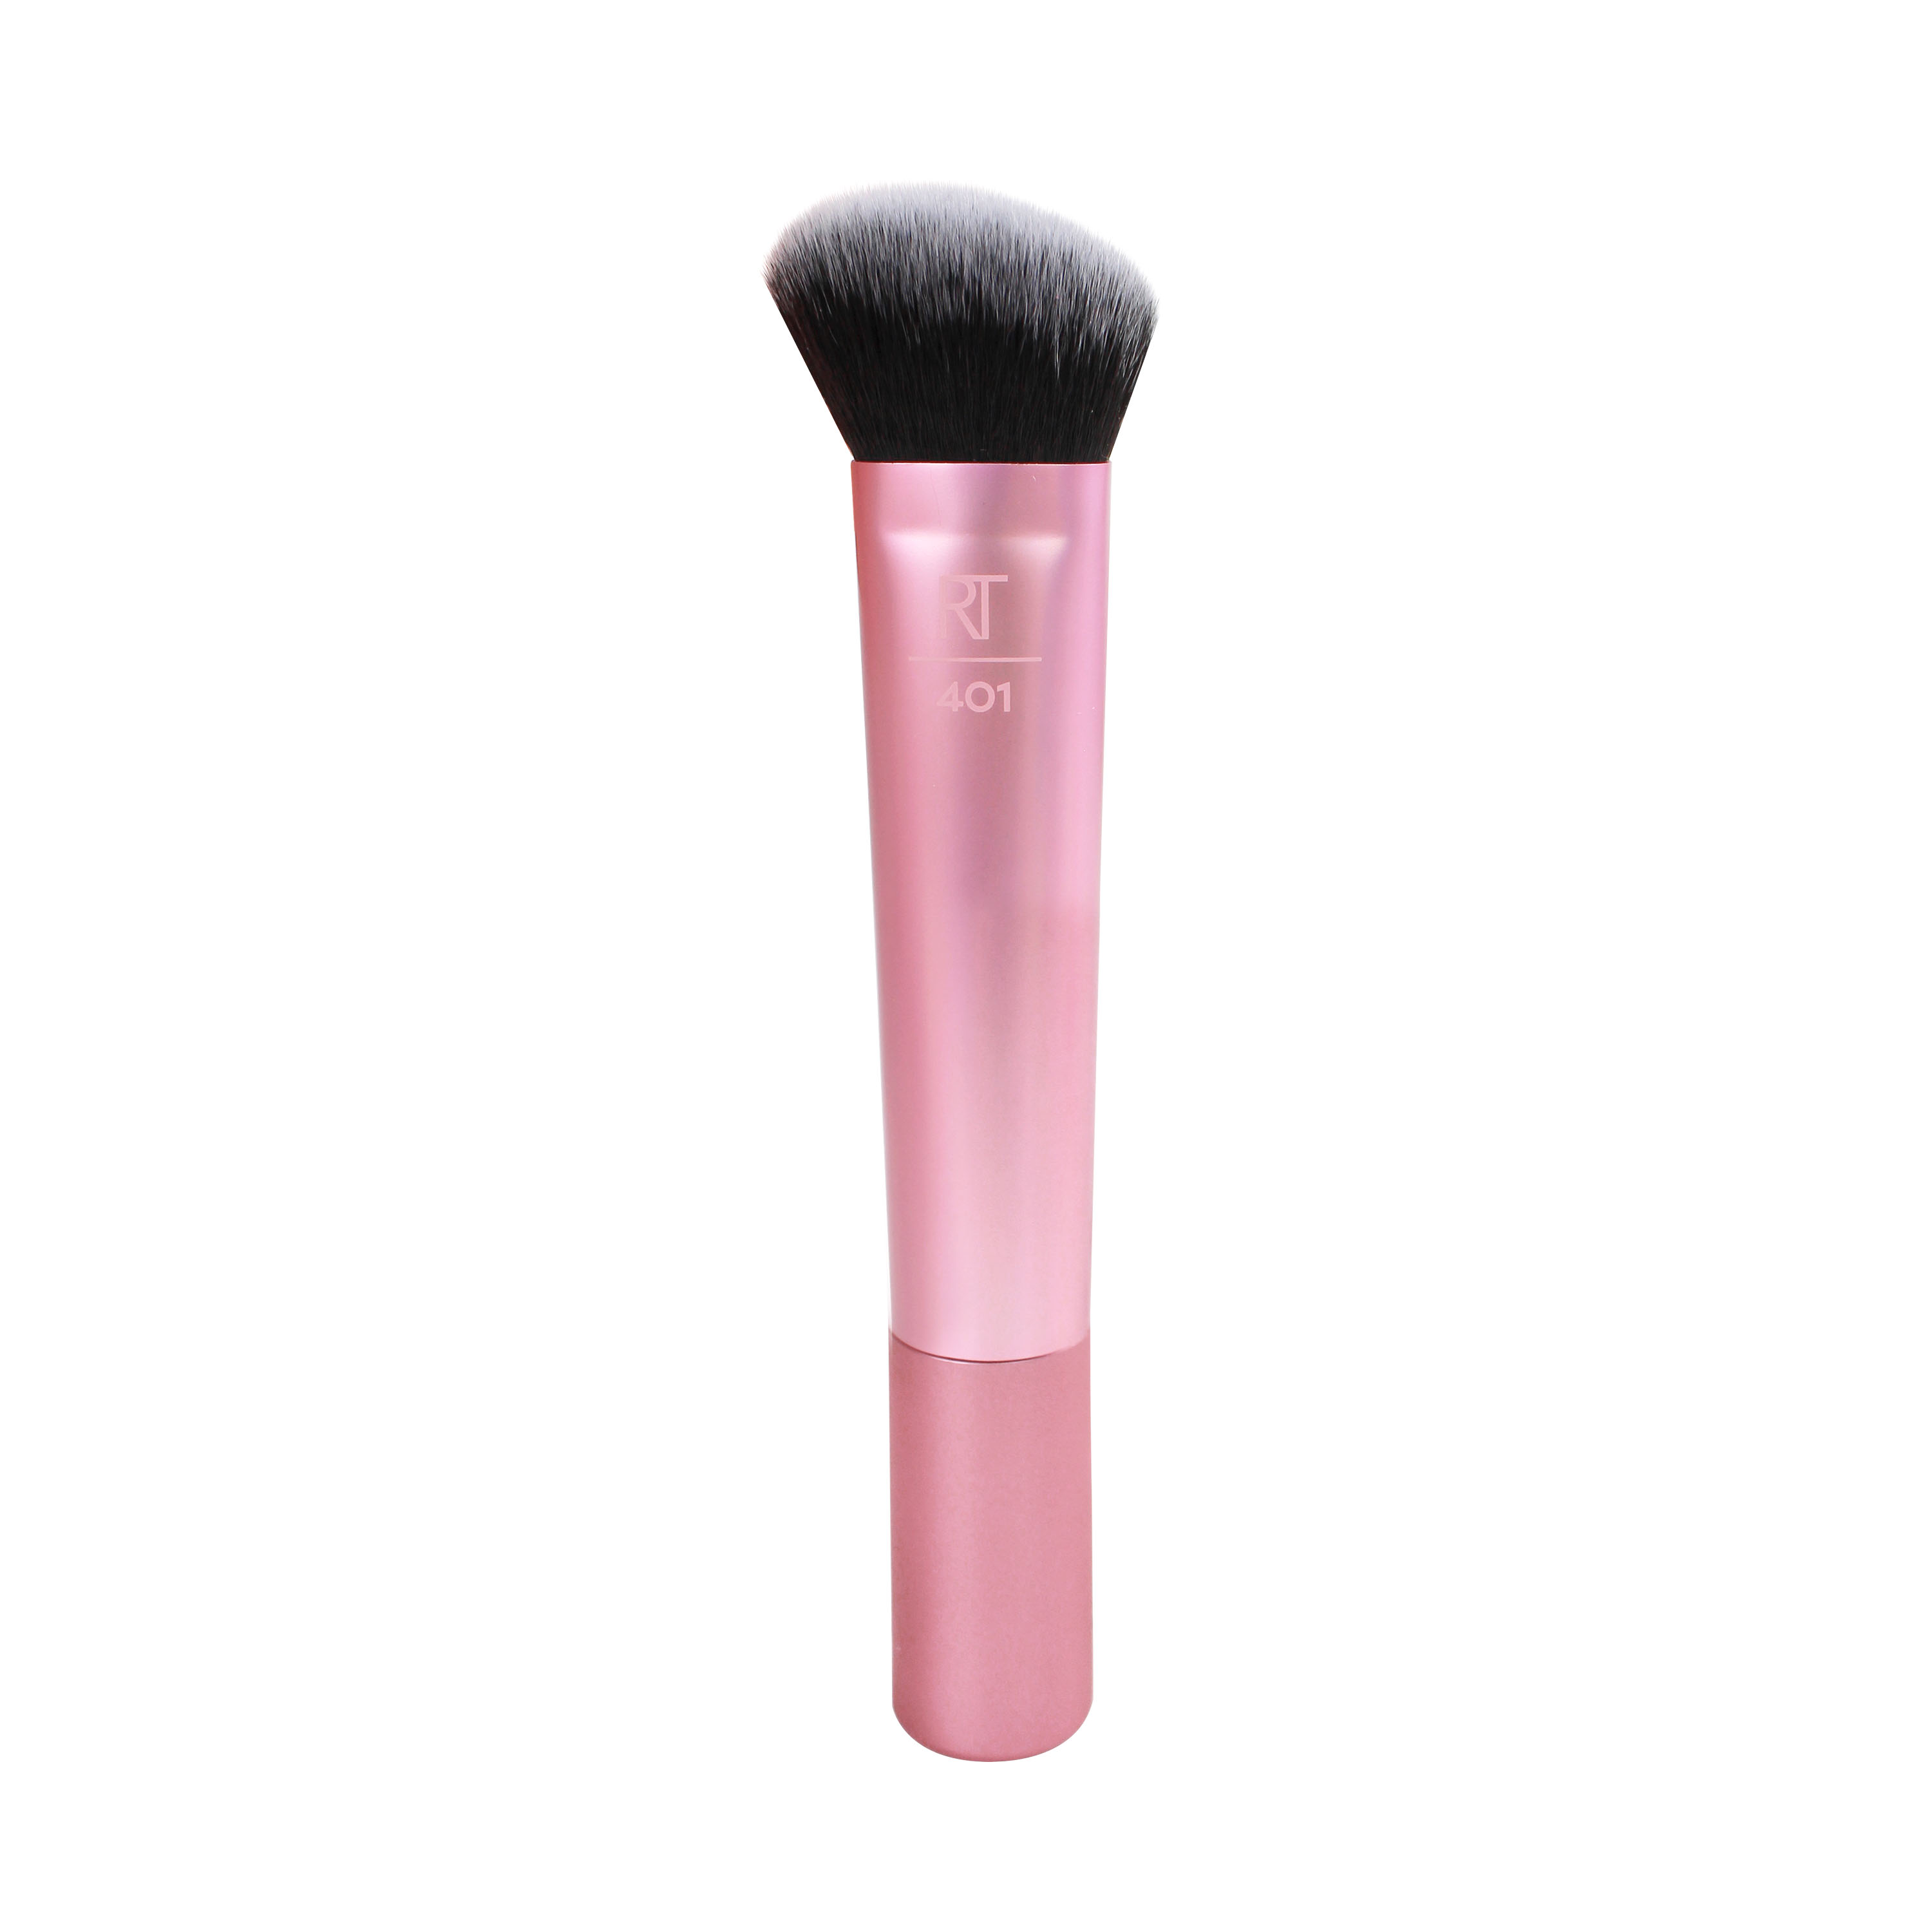 Real Techniques Sculpting Makeup Brush - image 1 of 5